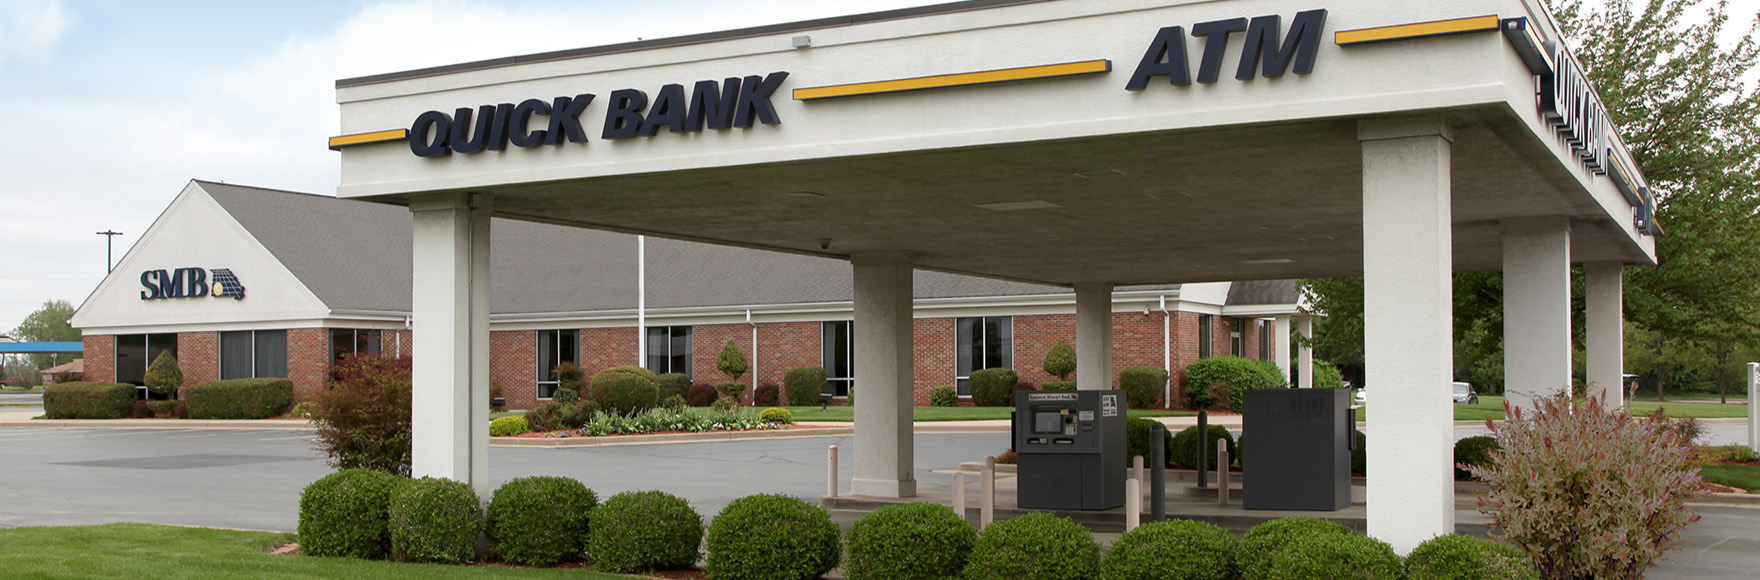 Southwest Missouri Bank ATM and Quick Bank in Joplin, MO 